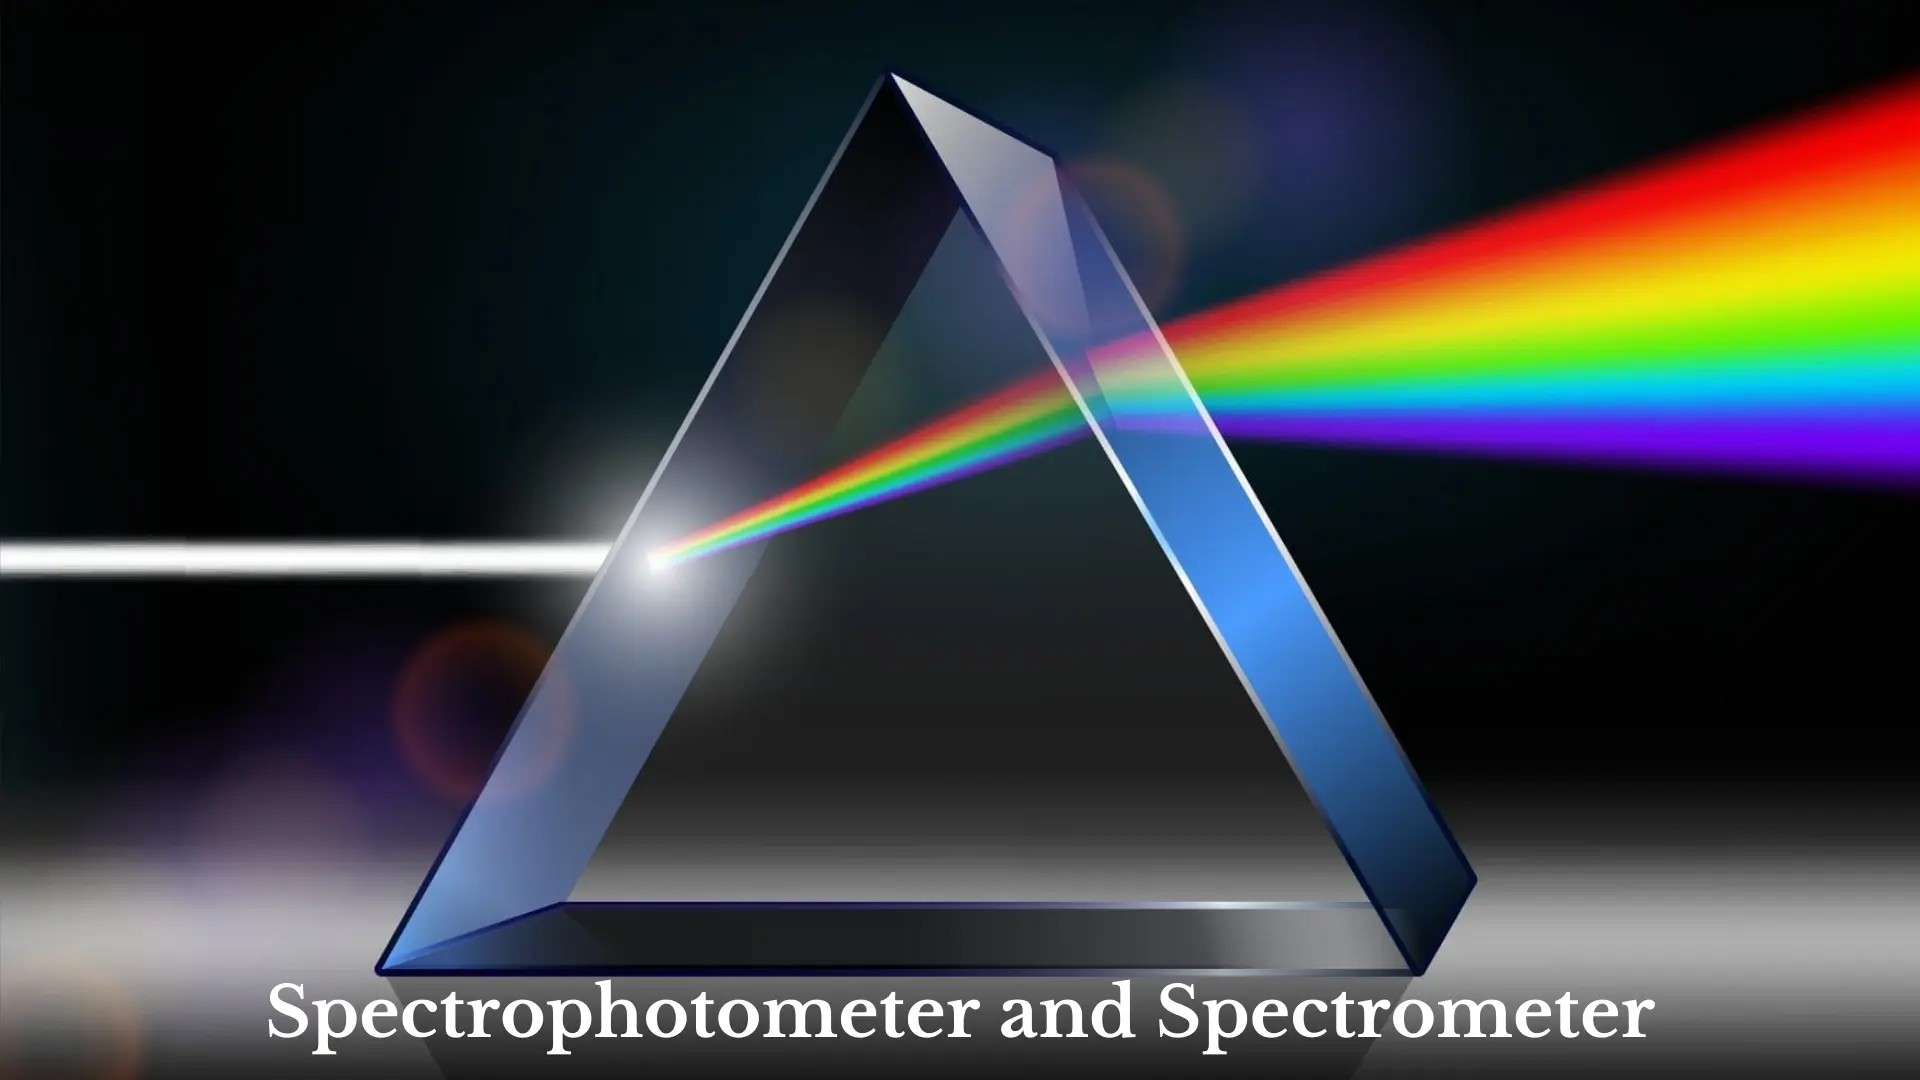 Spectrometer and Spectrophotometer